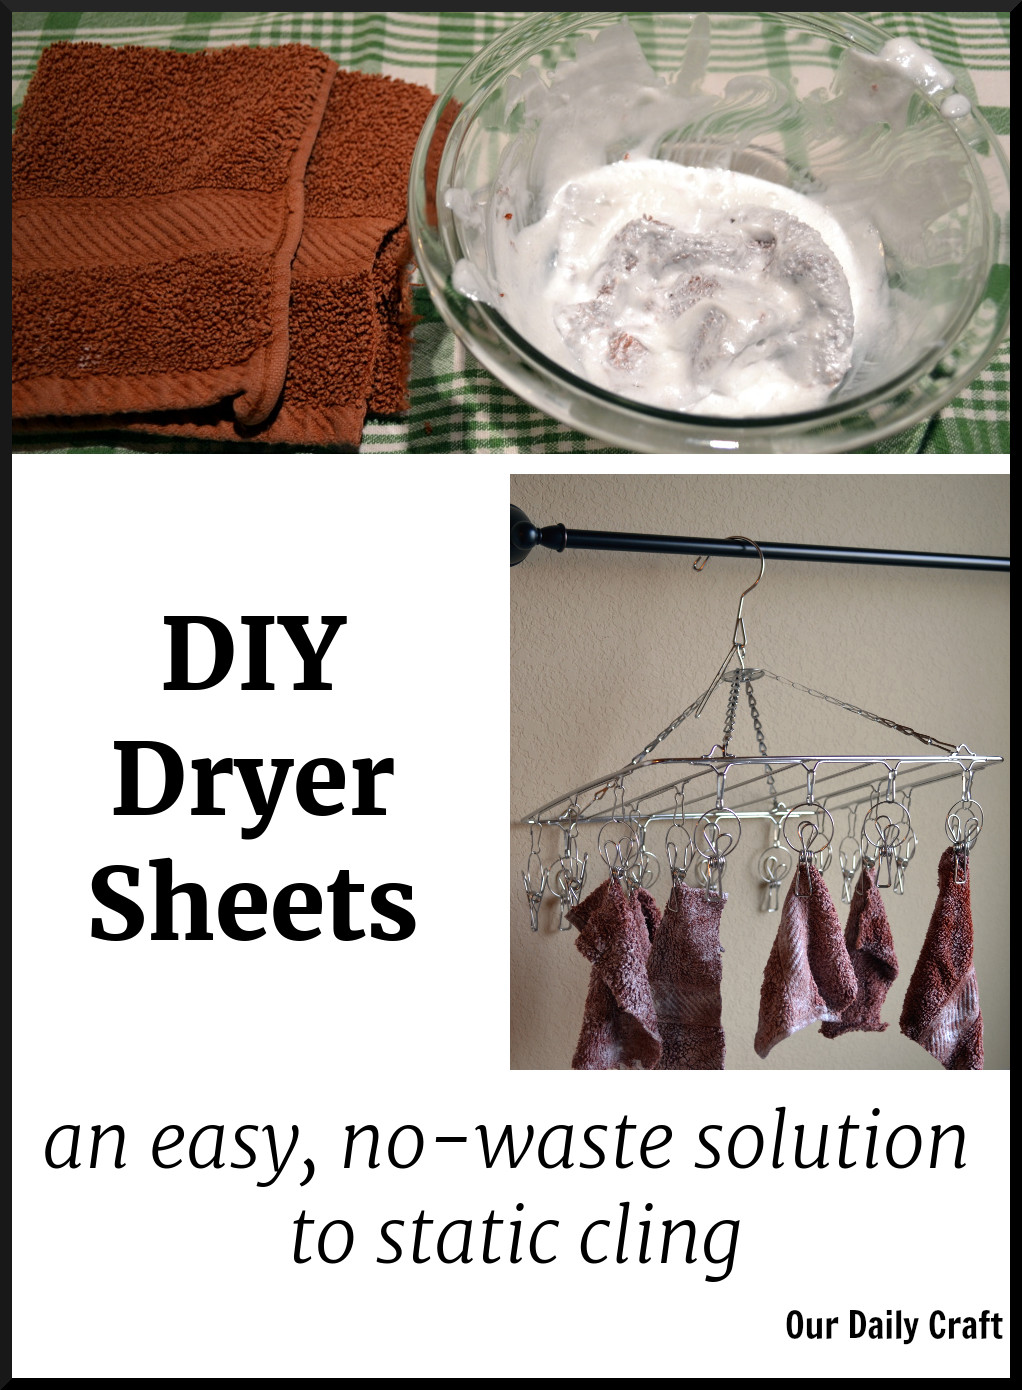 Reusable Dryer Sheets Are a Simple, No Waste Solution